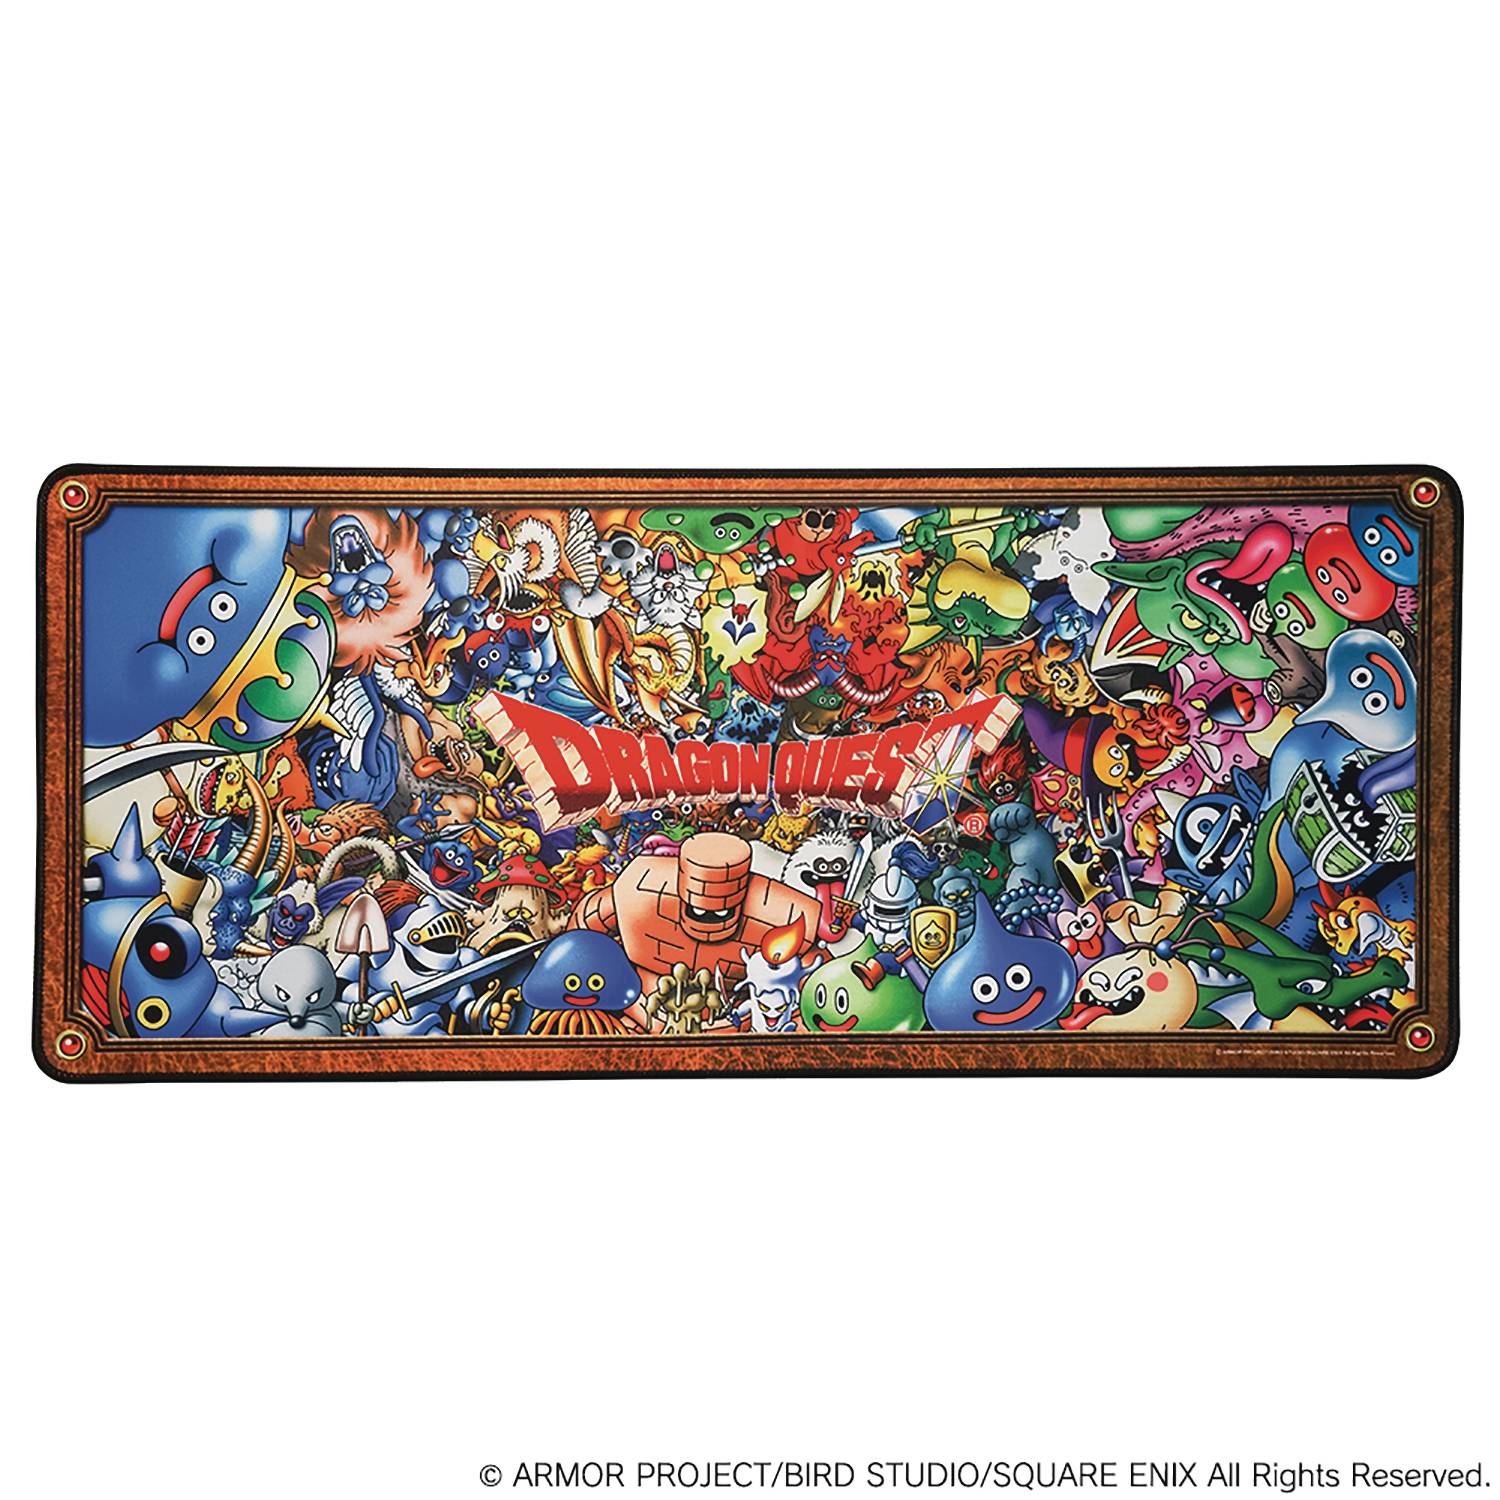 DRAGON QUEST AN ARMY OF MONSTERS GAMING MOUSE PAD